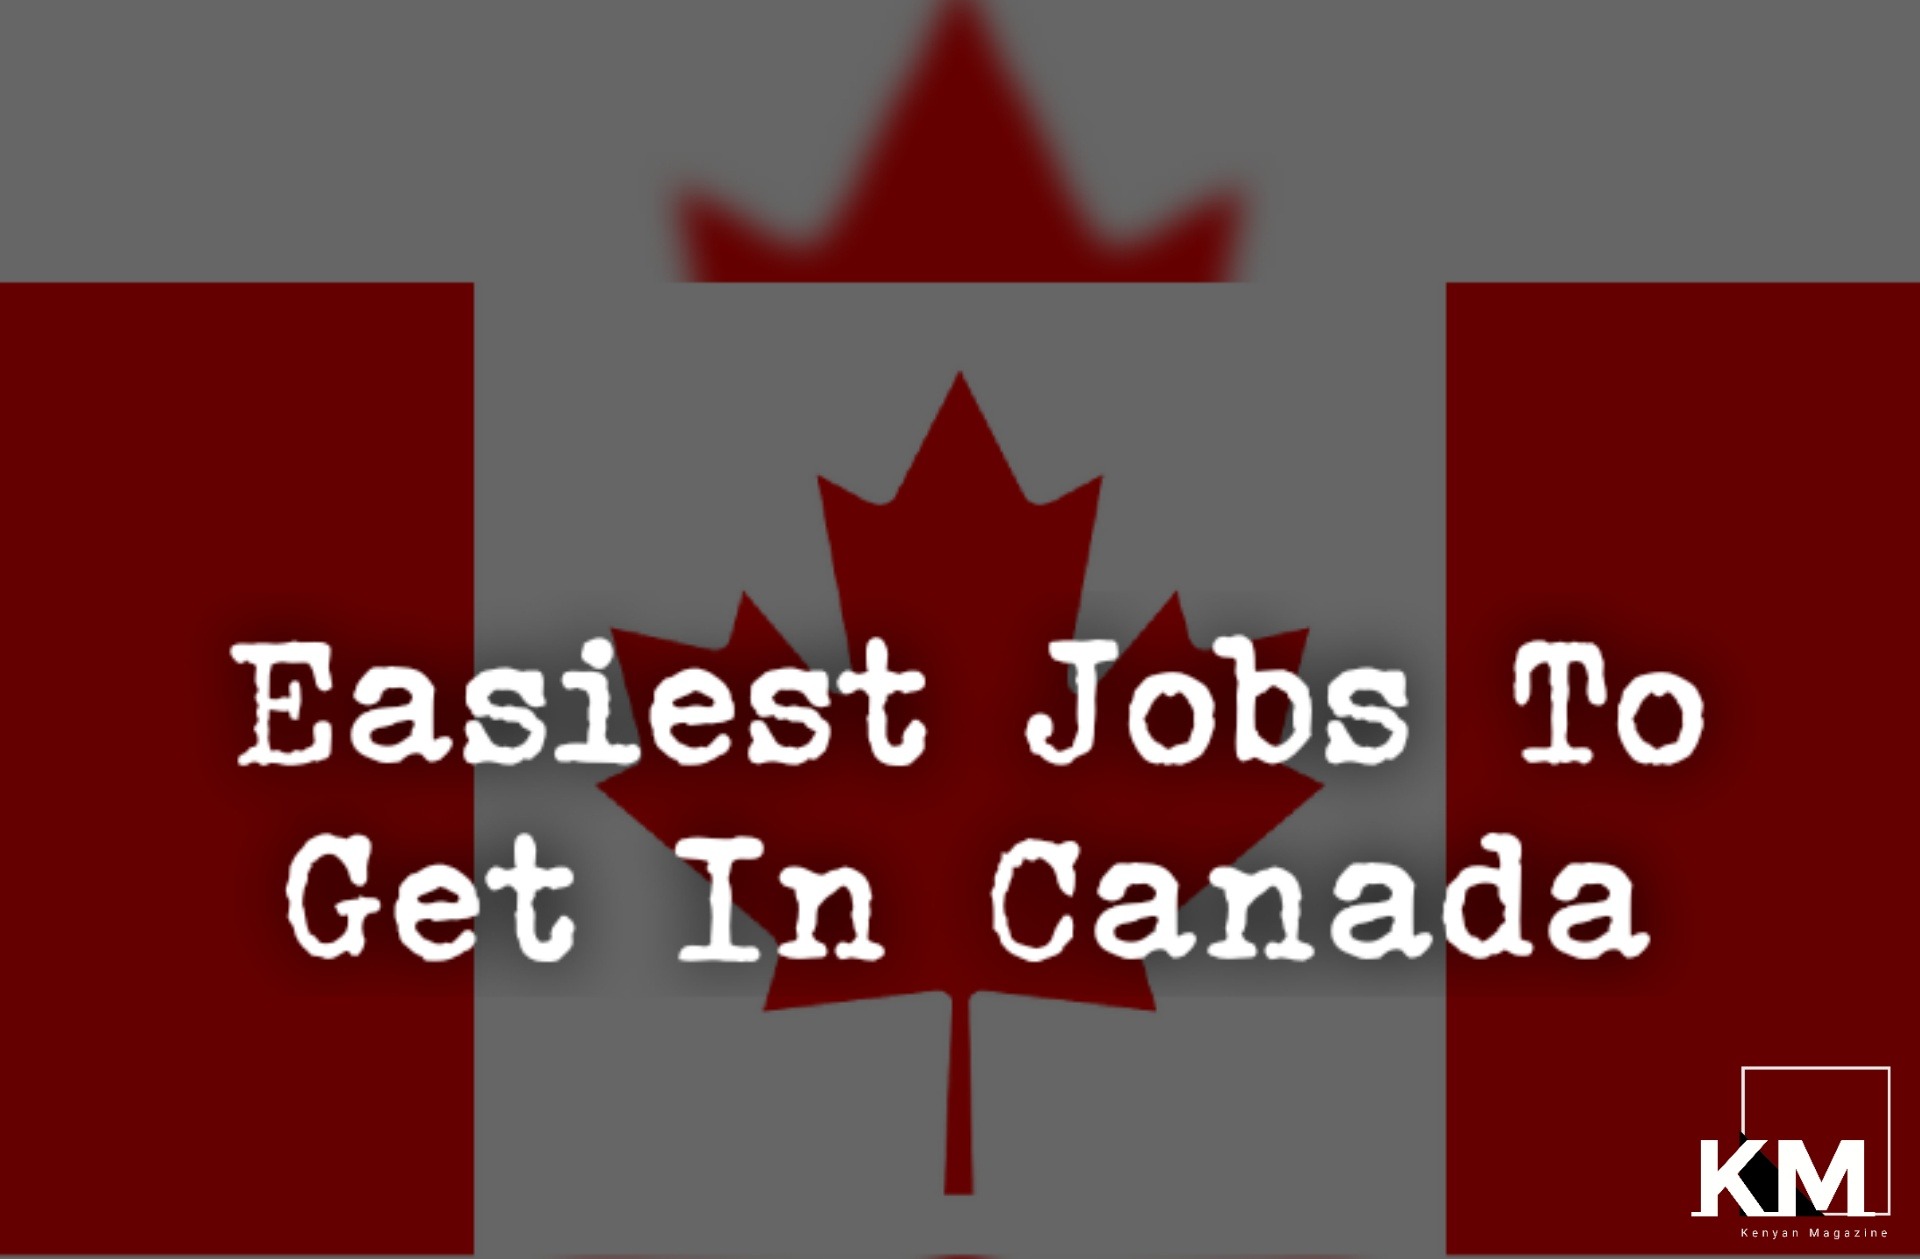 Easiest Jobs To Get In Canada